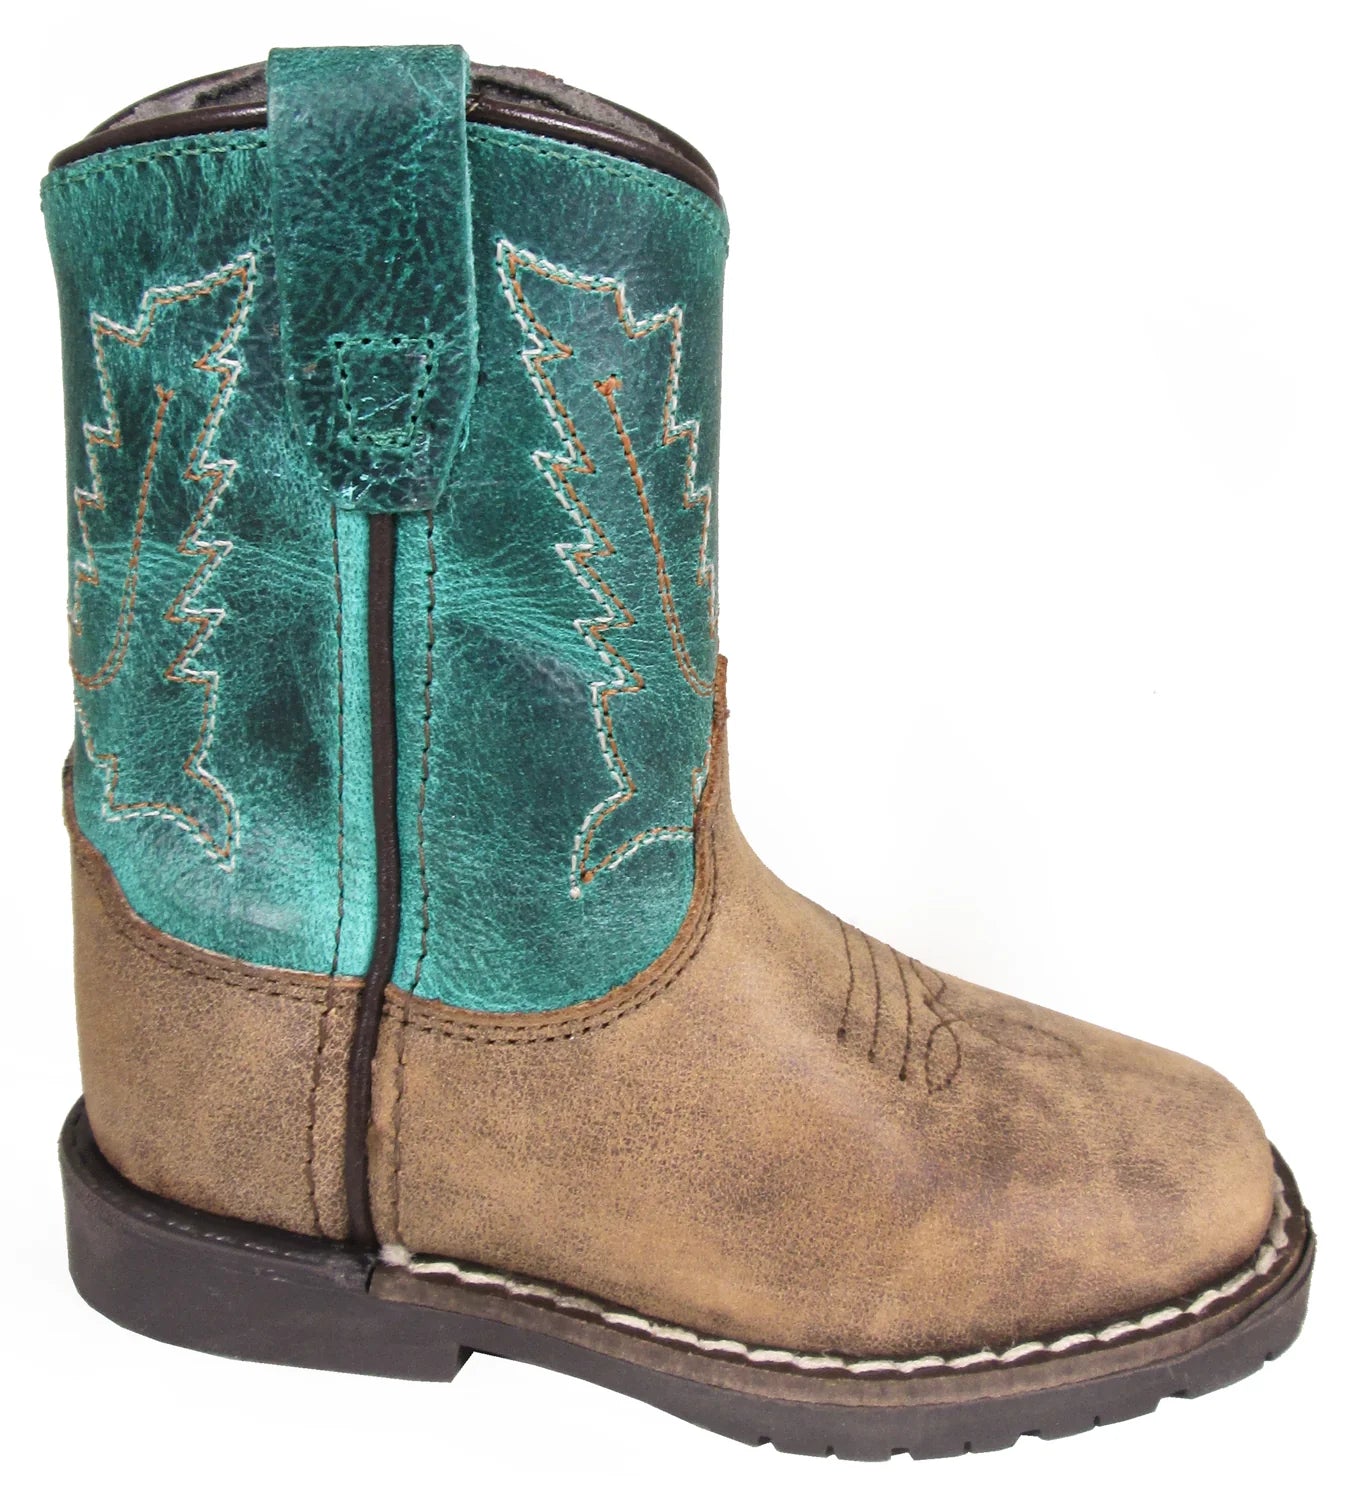 Smoky Mountain Infant Brown & Turquoise Distressed Boot STYLE 3056T